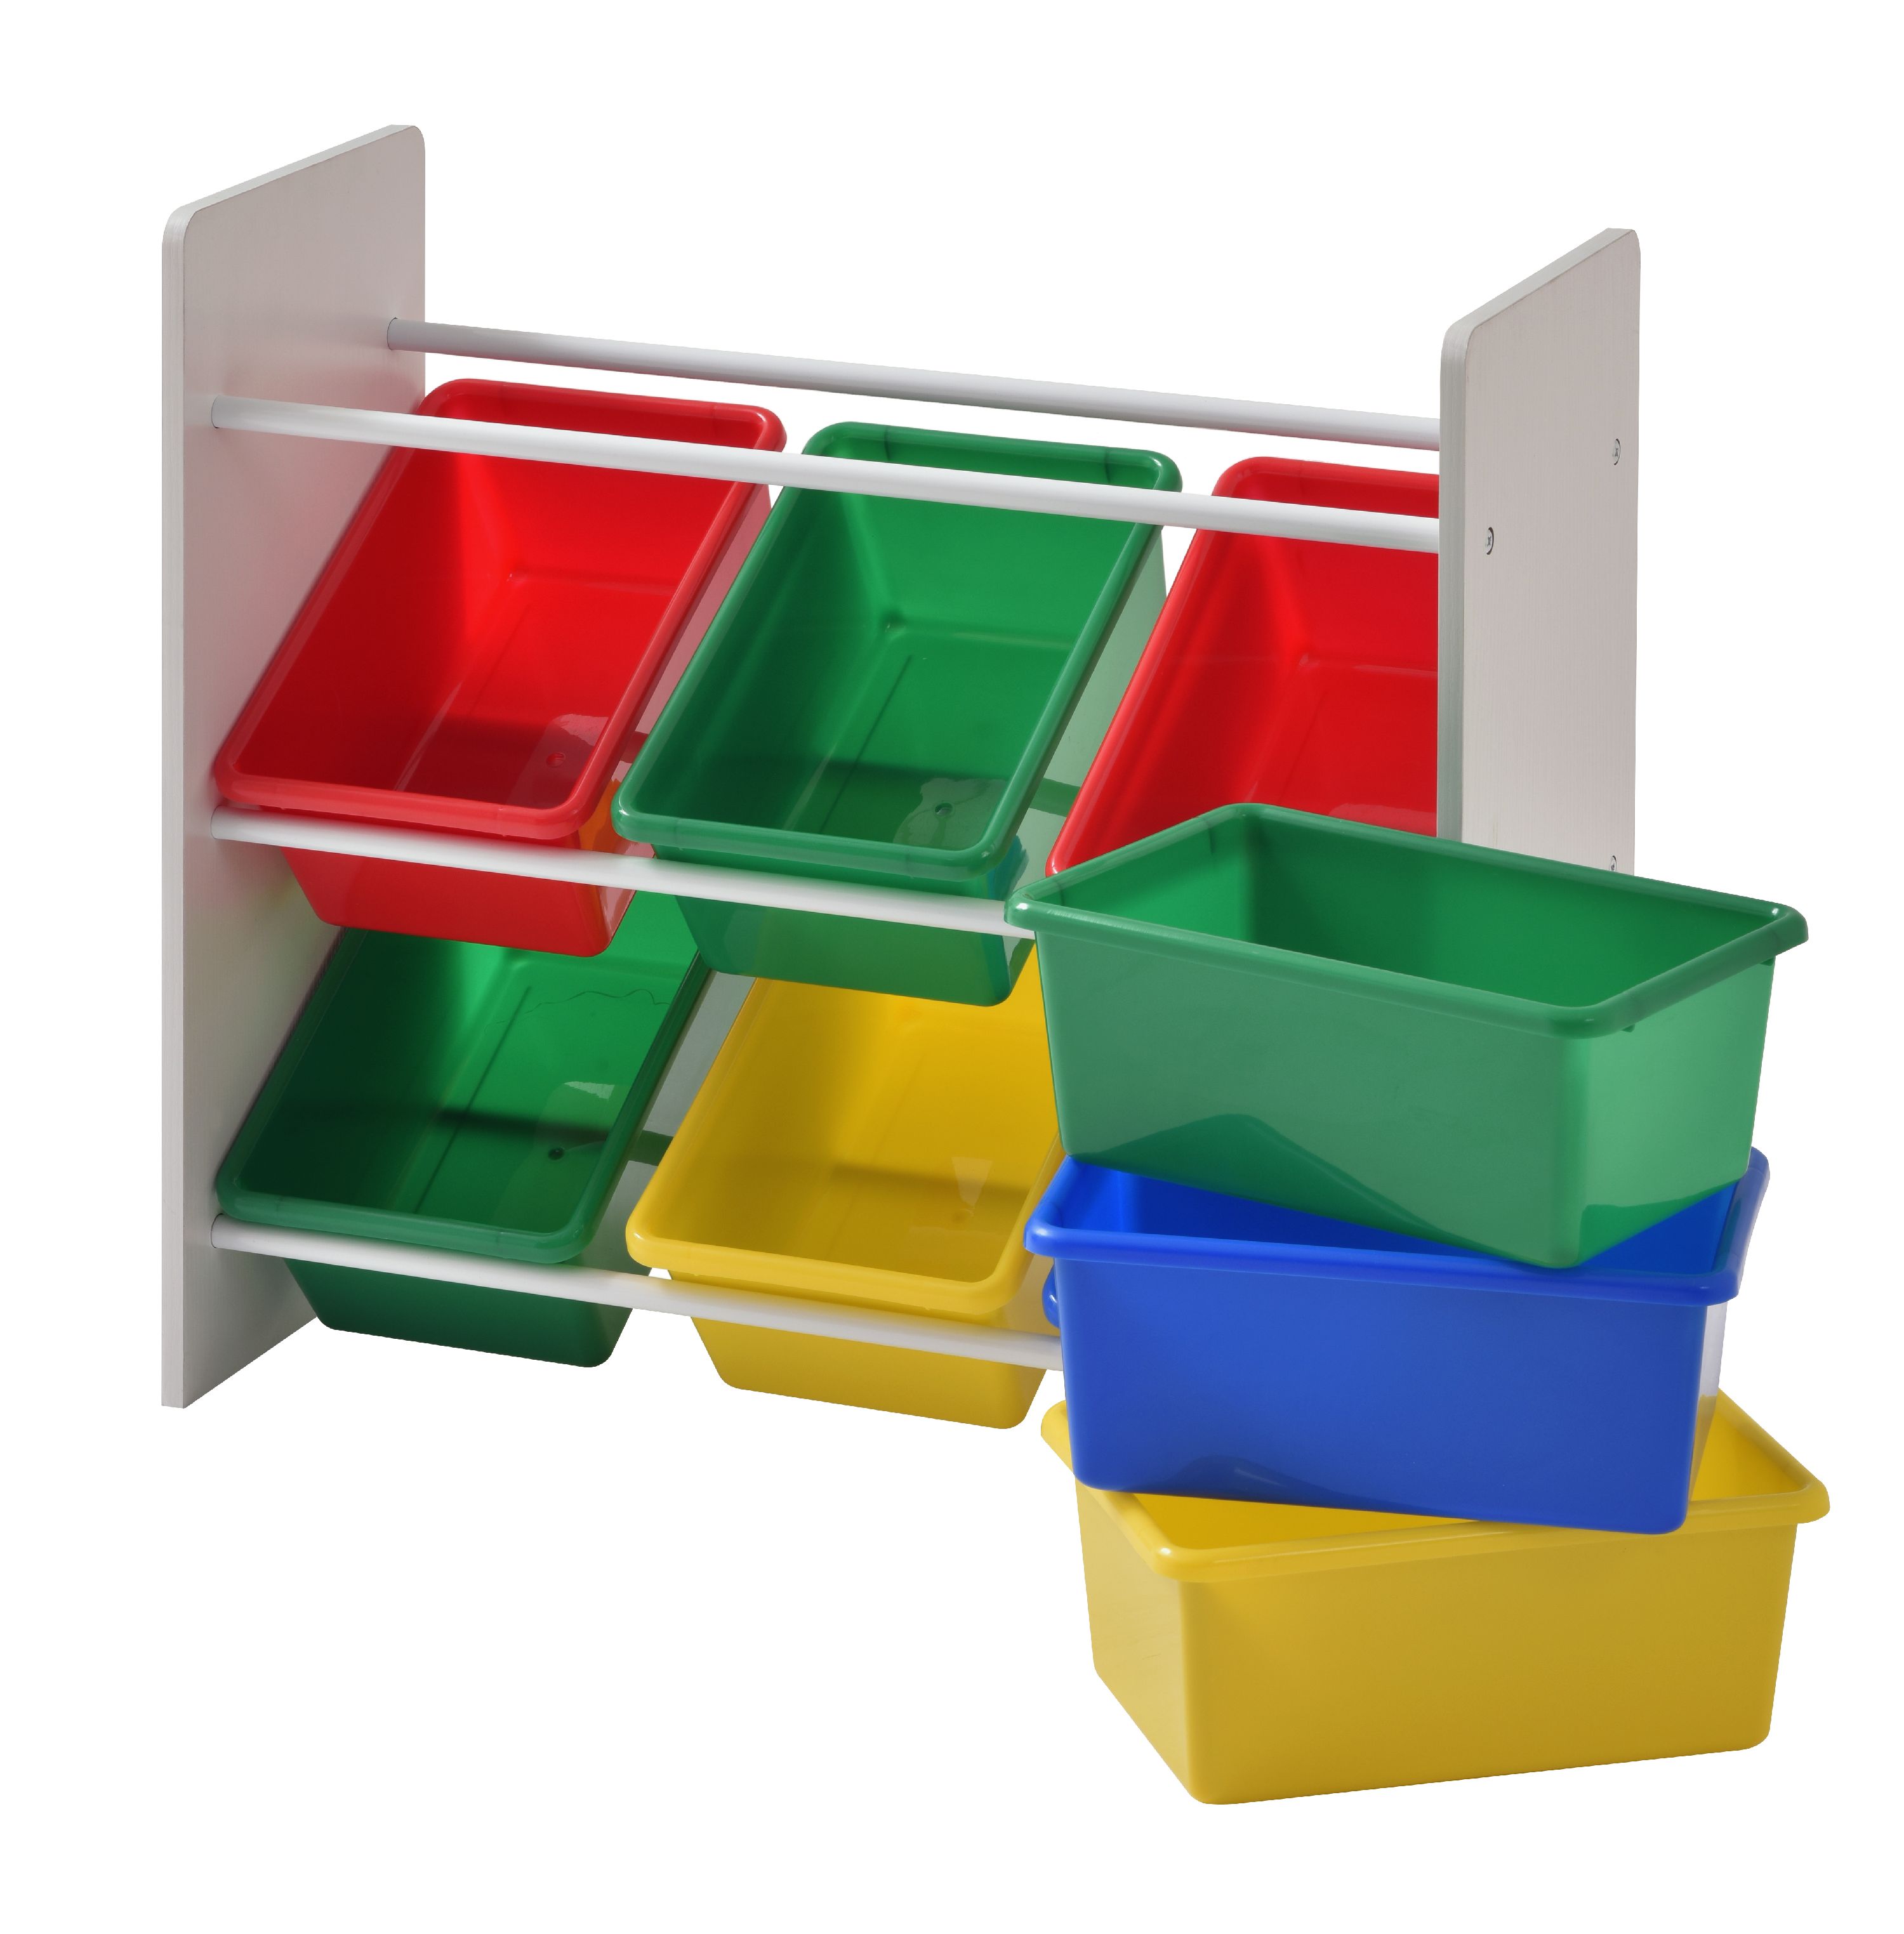 Muscle Rack Kids Storage Organizer with 9 Multi color Bins - image 3 of 3